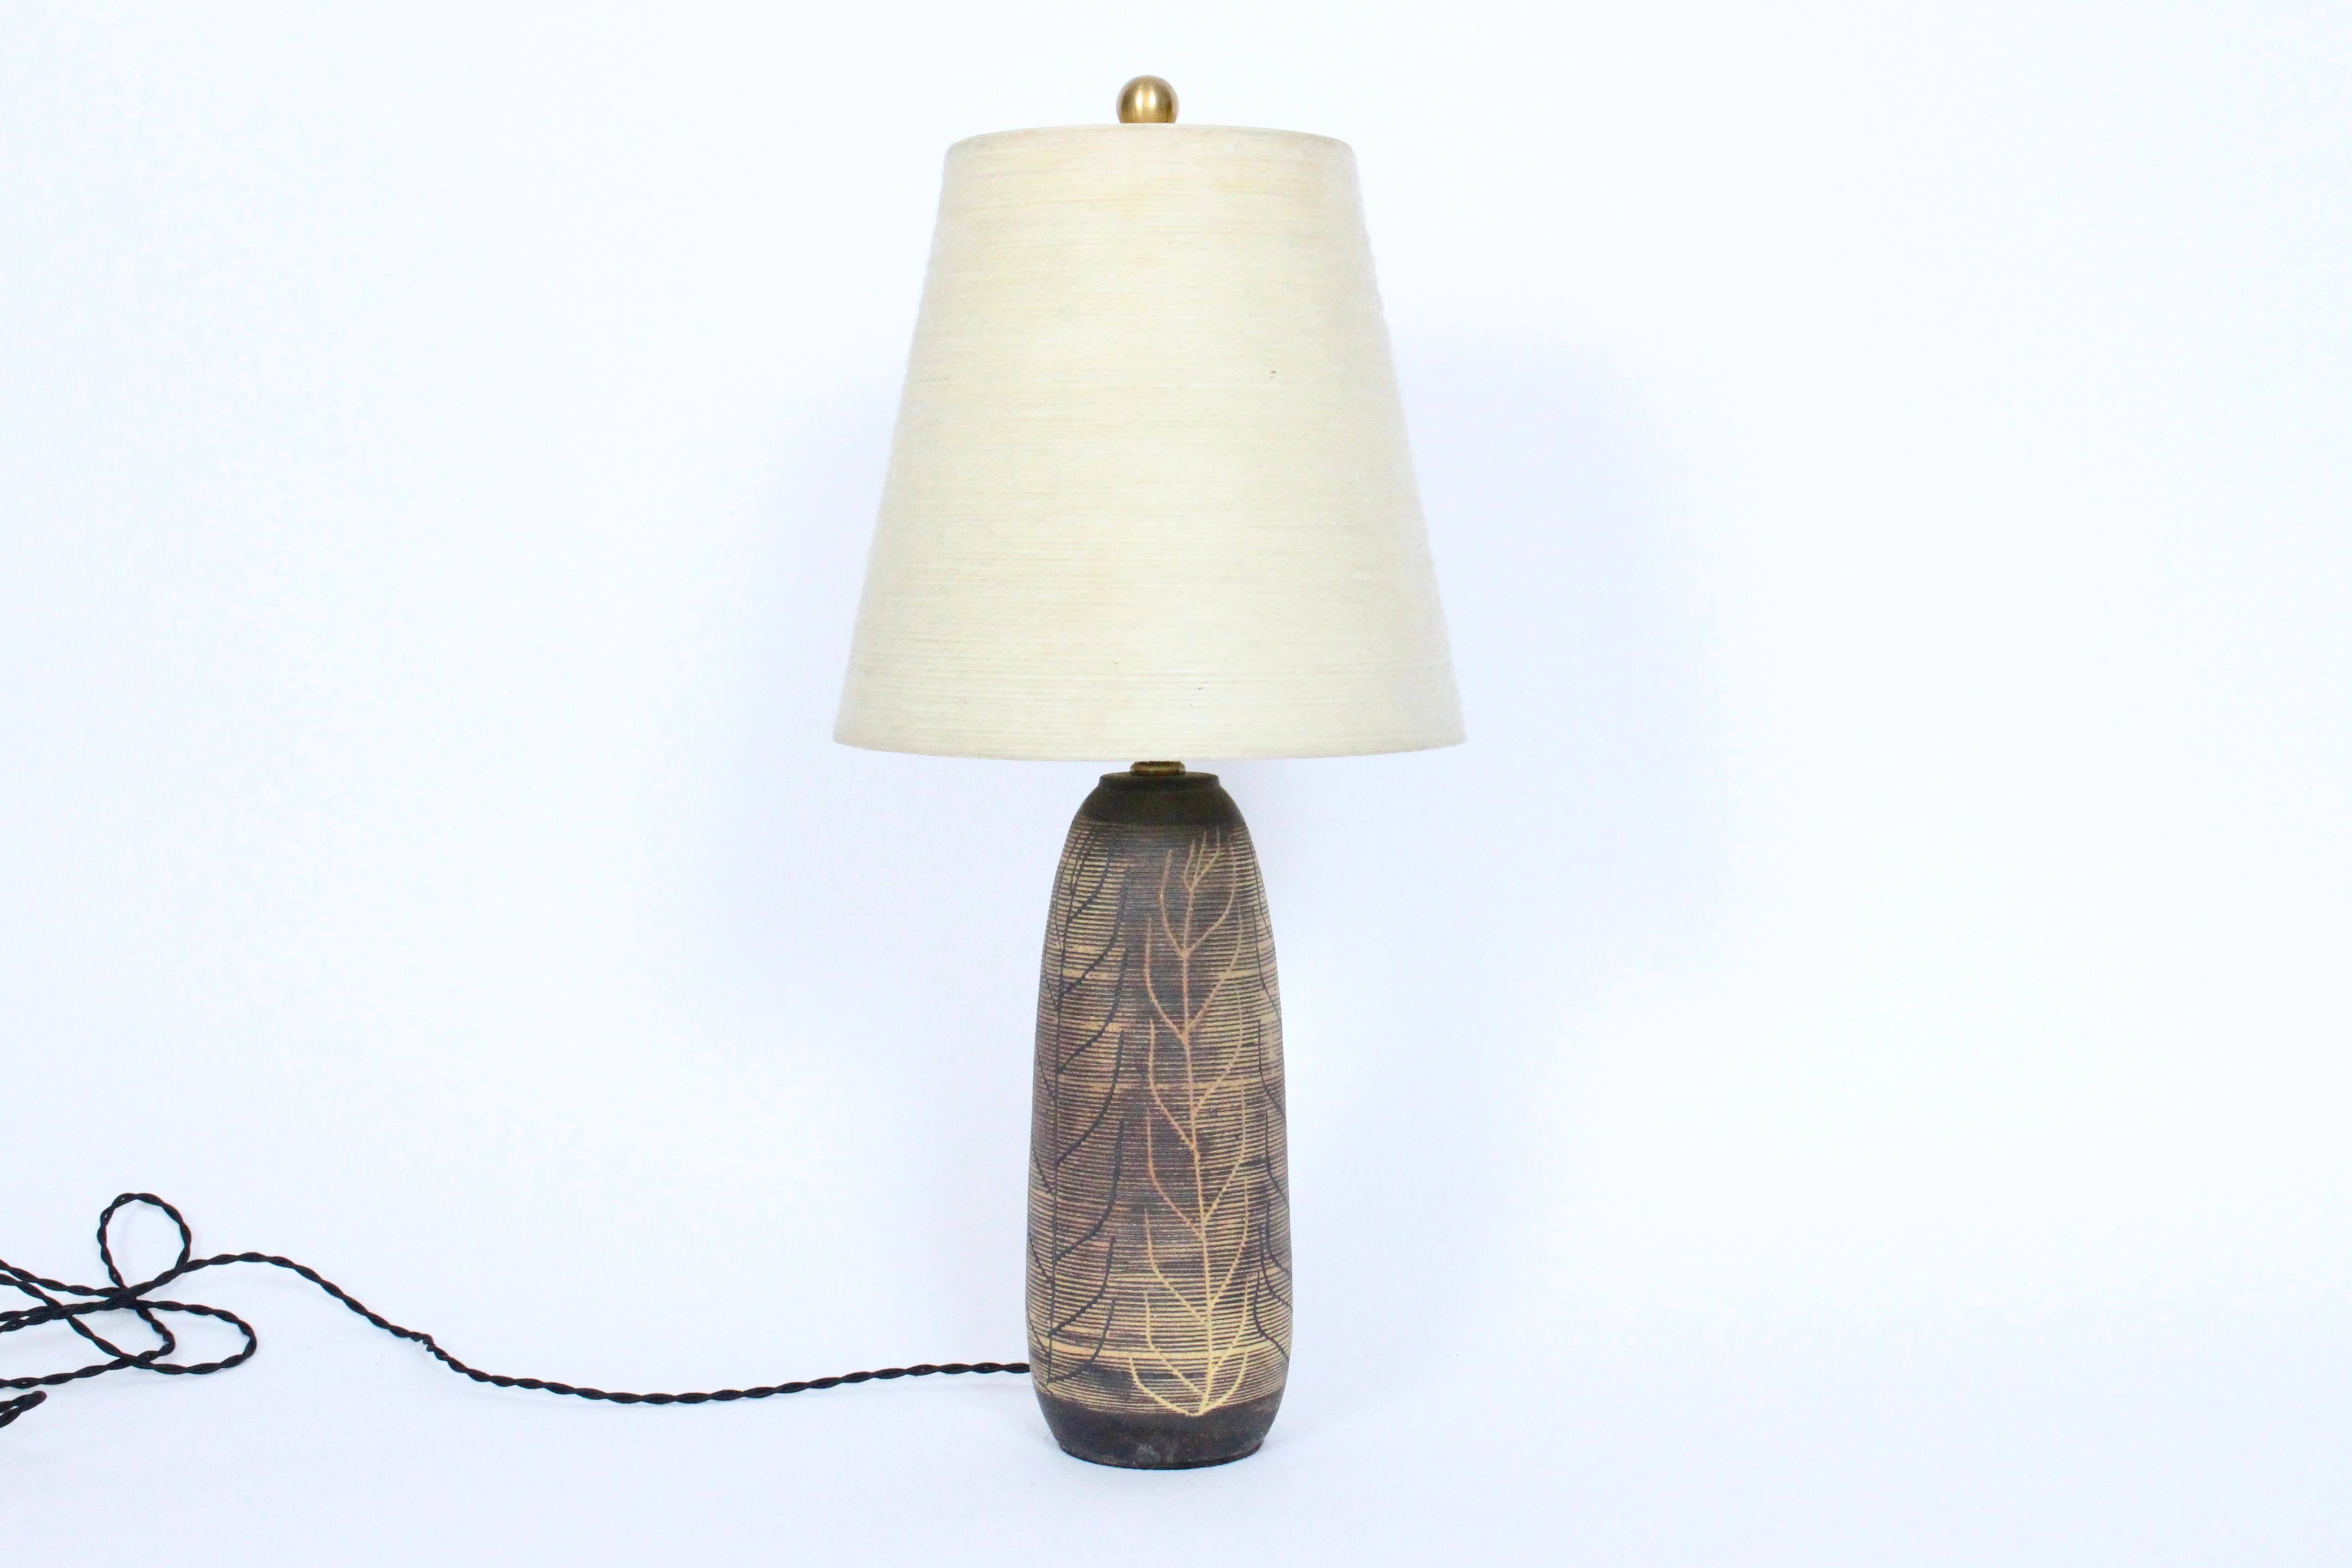 Vermont Potter Nancy Wickham Boyd for Design-Technics hand carved organic modern stoneware table lamp. Featuring a glazed handcrafted tapered cylindrical ceramic form with leaf and branch designs in mustard, olive and brown earthen natural tones and